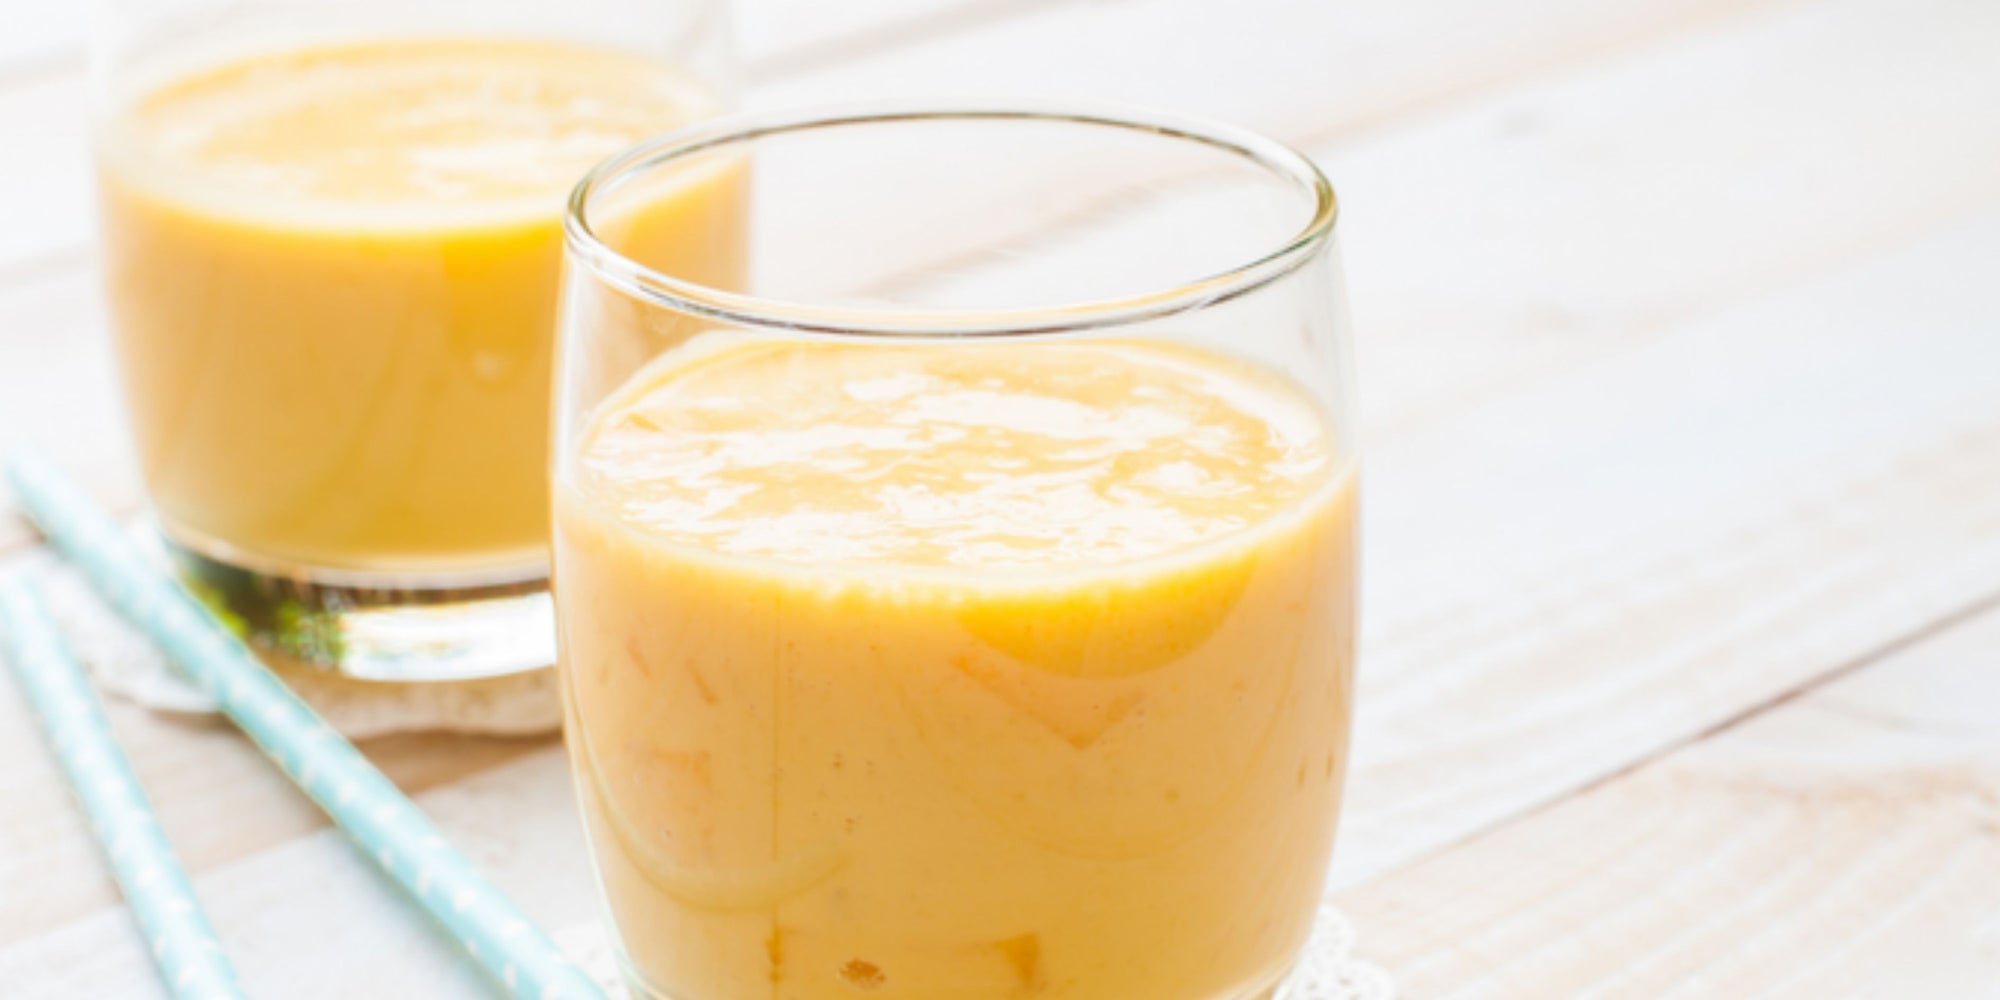 Ginger and Pineapple Smoothie